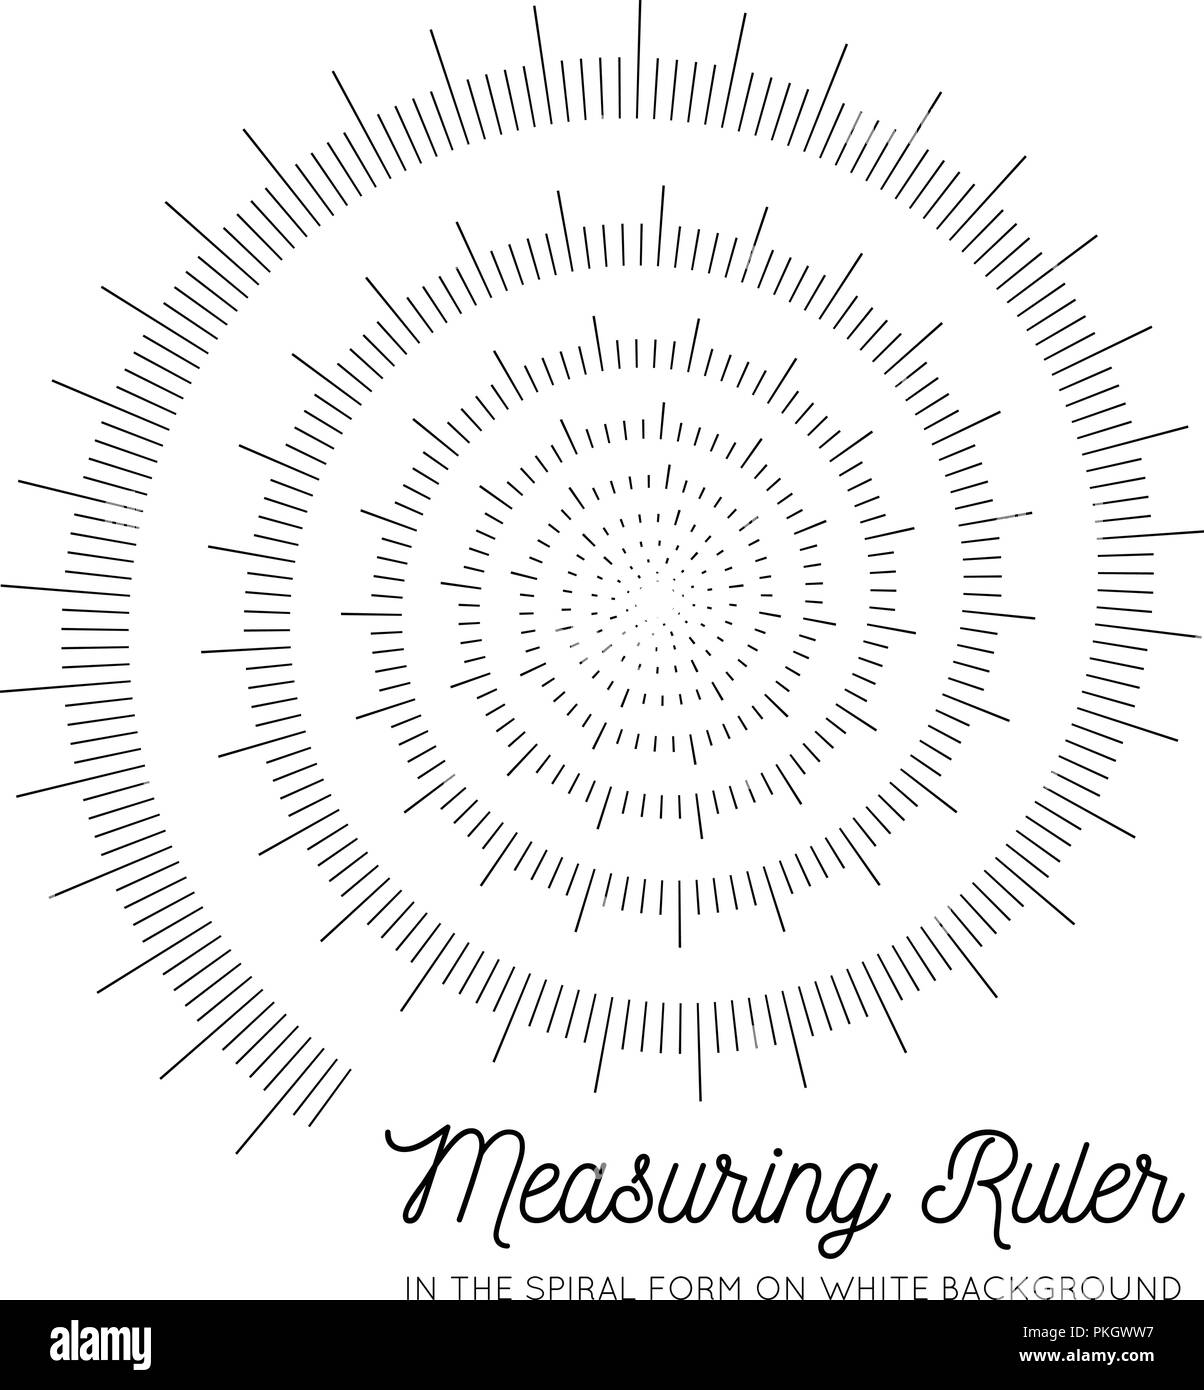 Measuring rulers In the form of a spiral Stock Vector